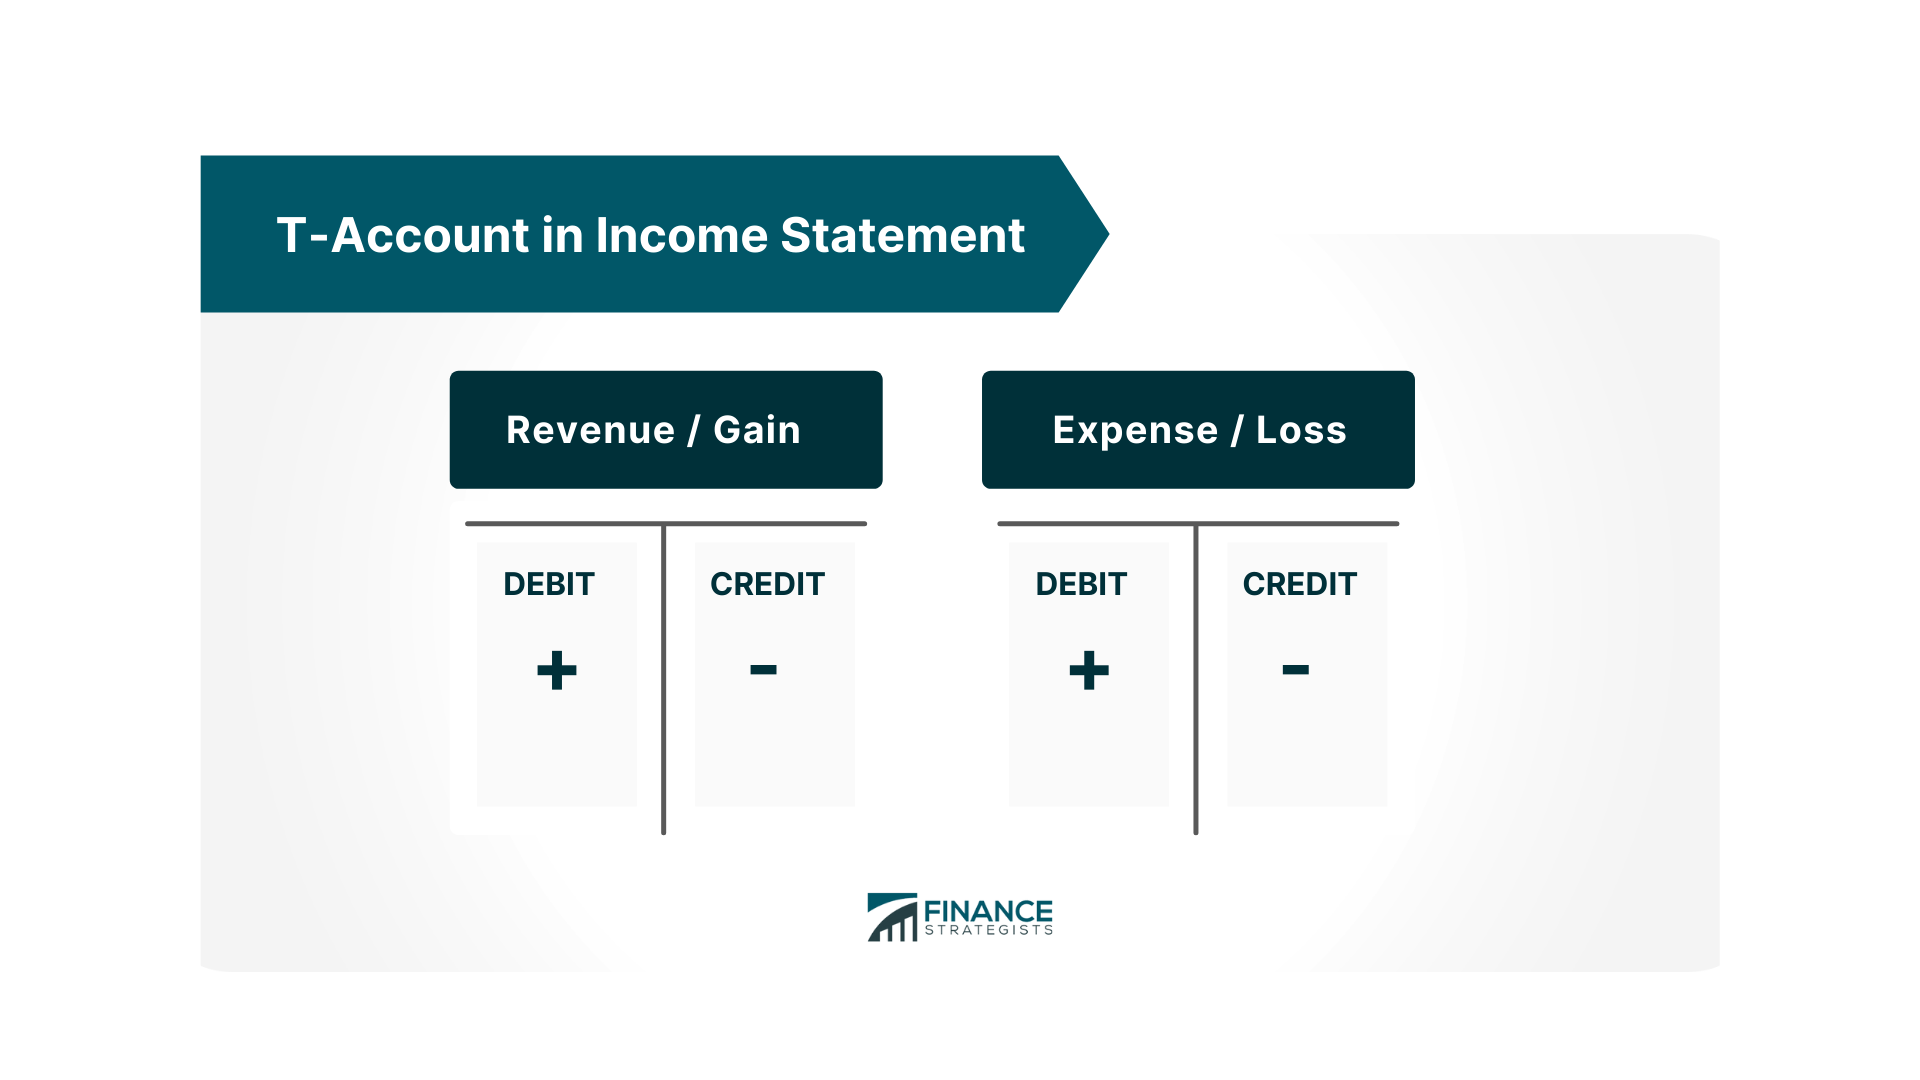 T-Account in Income Statement